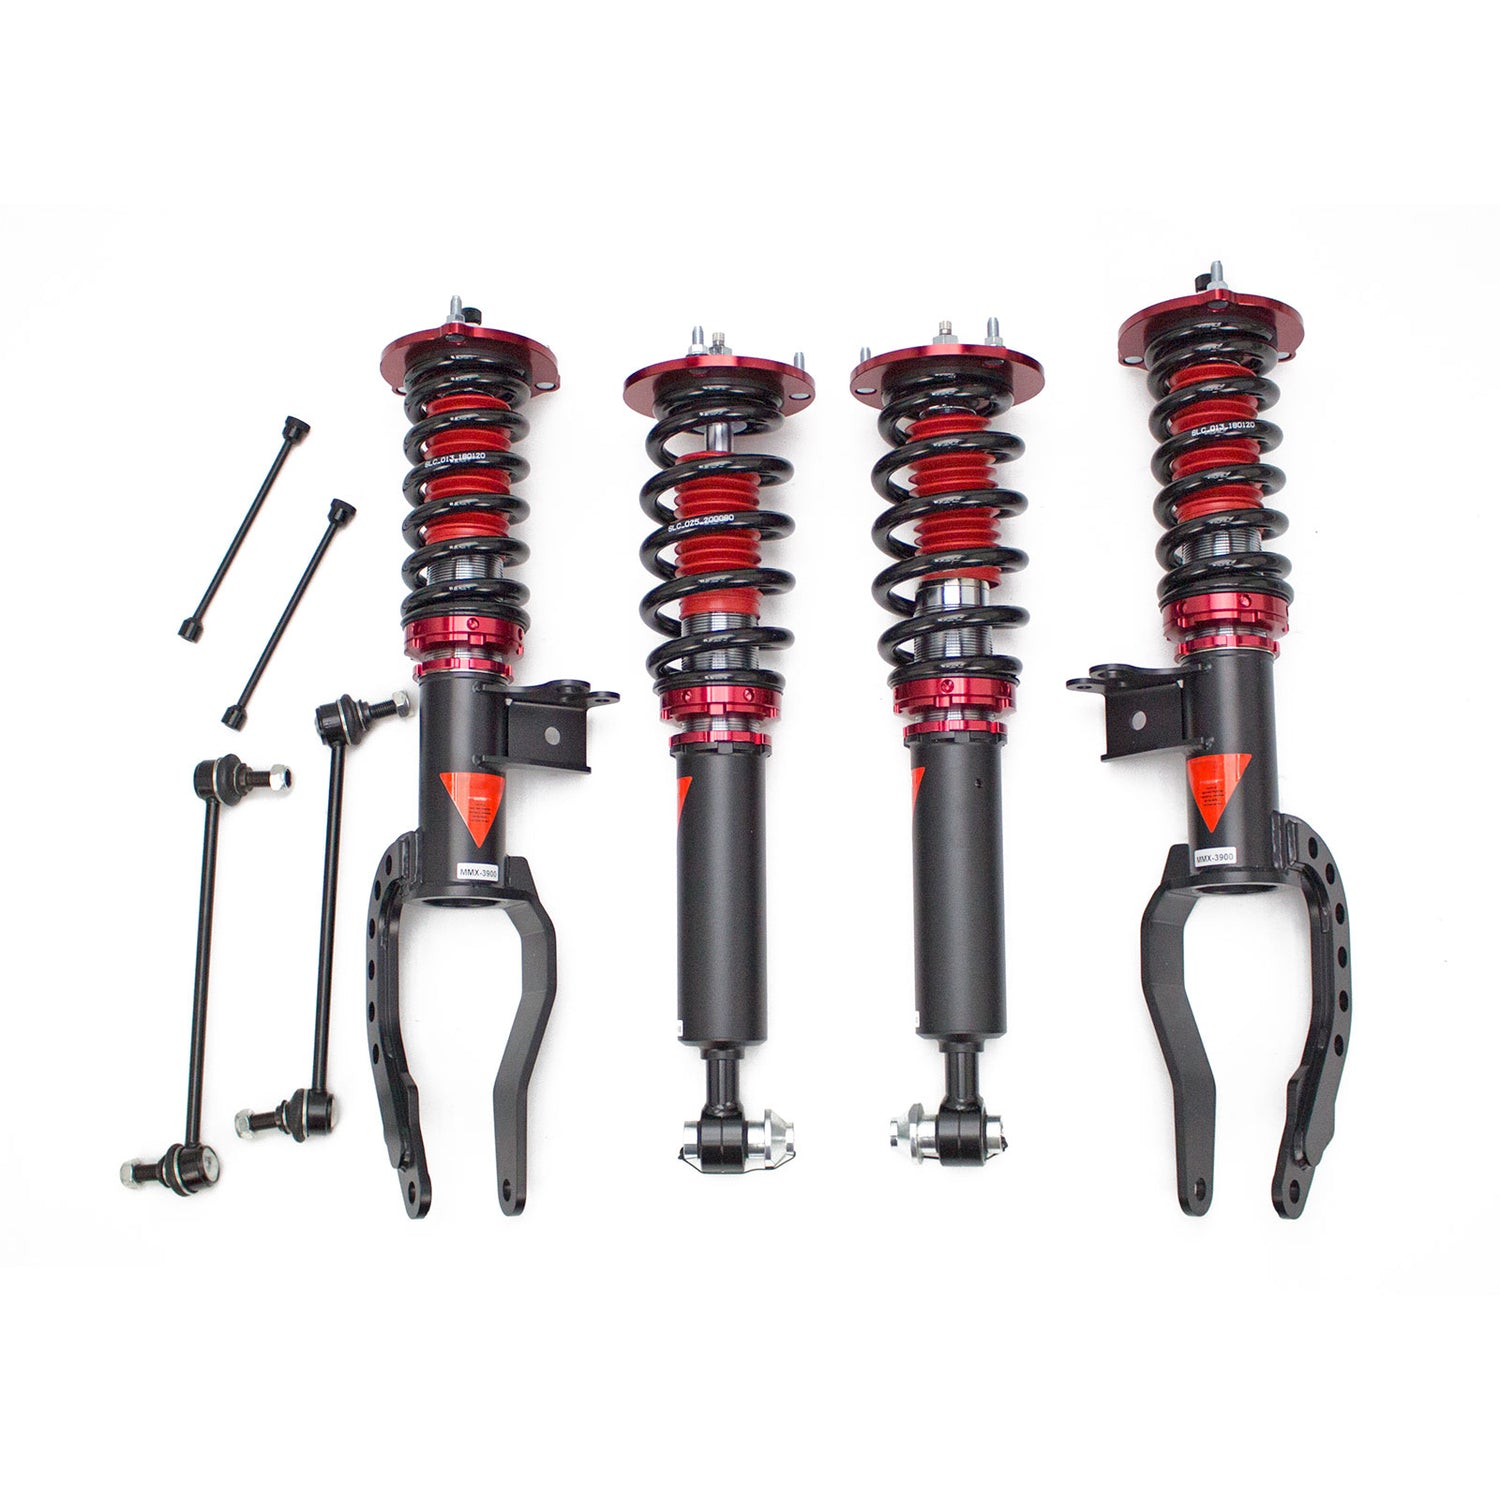 MMX3900-B MAXX Coilovers Lowering Kit, Fully Adjustable, Ride Height, 40 Clicks Rebound Settings, BMW 6-Series(F06/F12/F13) xDrive(AWD) 2014-18